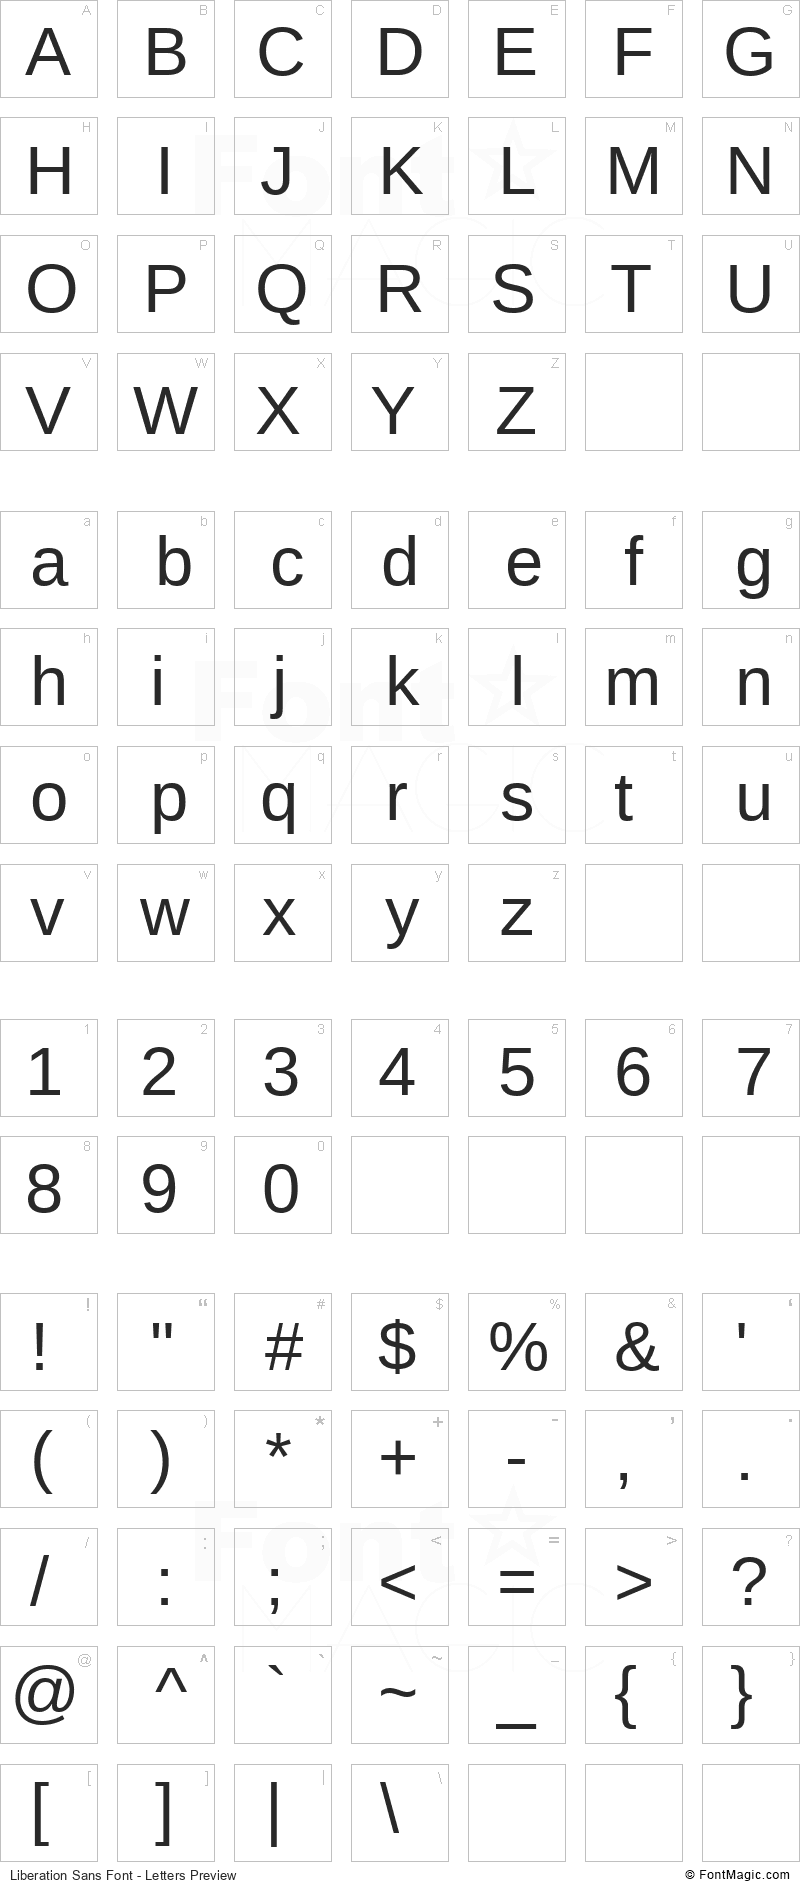 Liberation Sans Font - All Latters Preview Chart